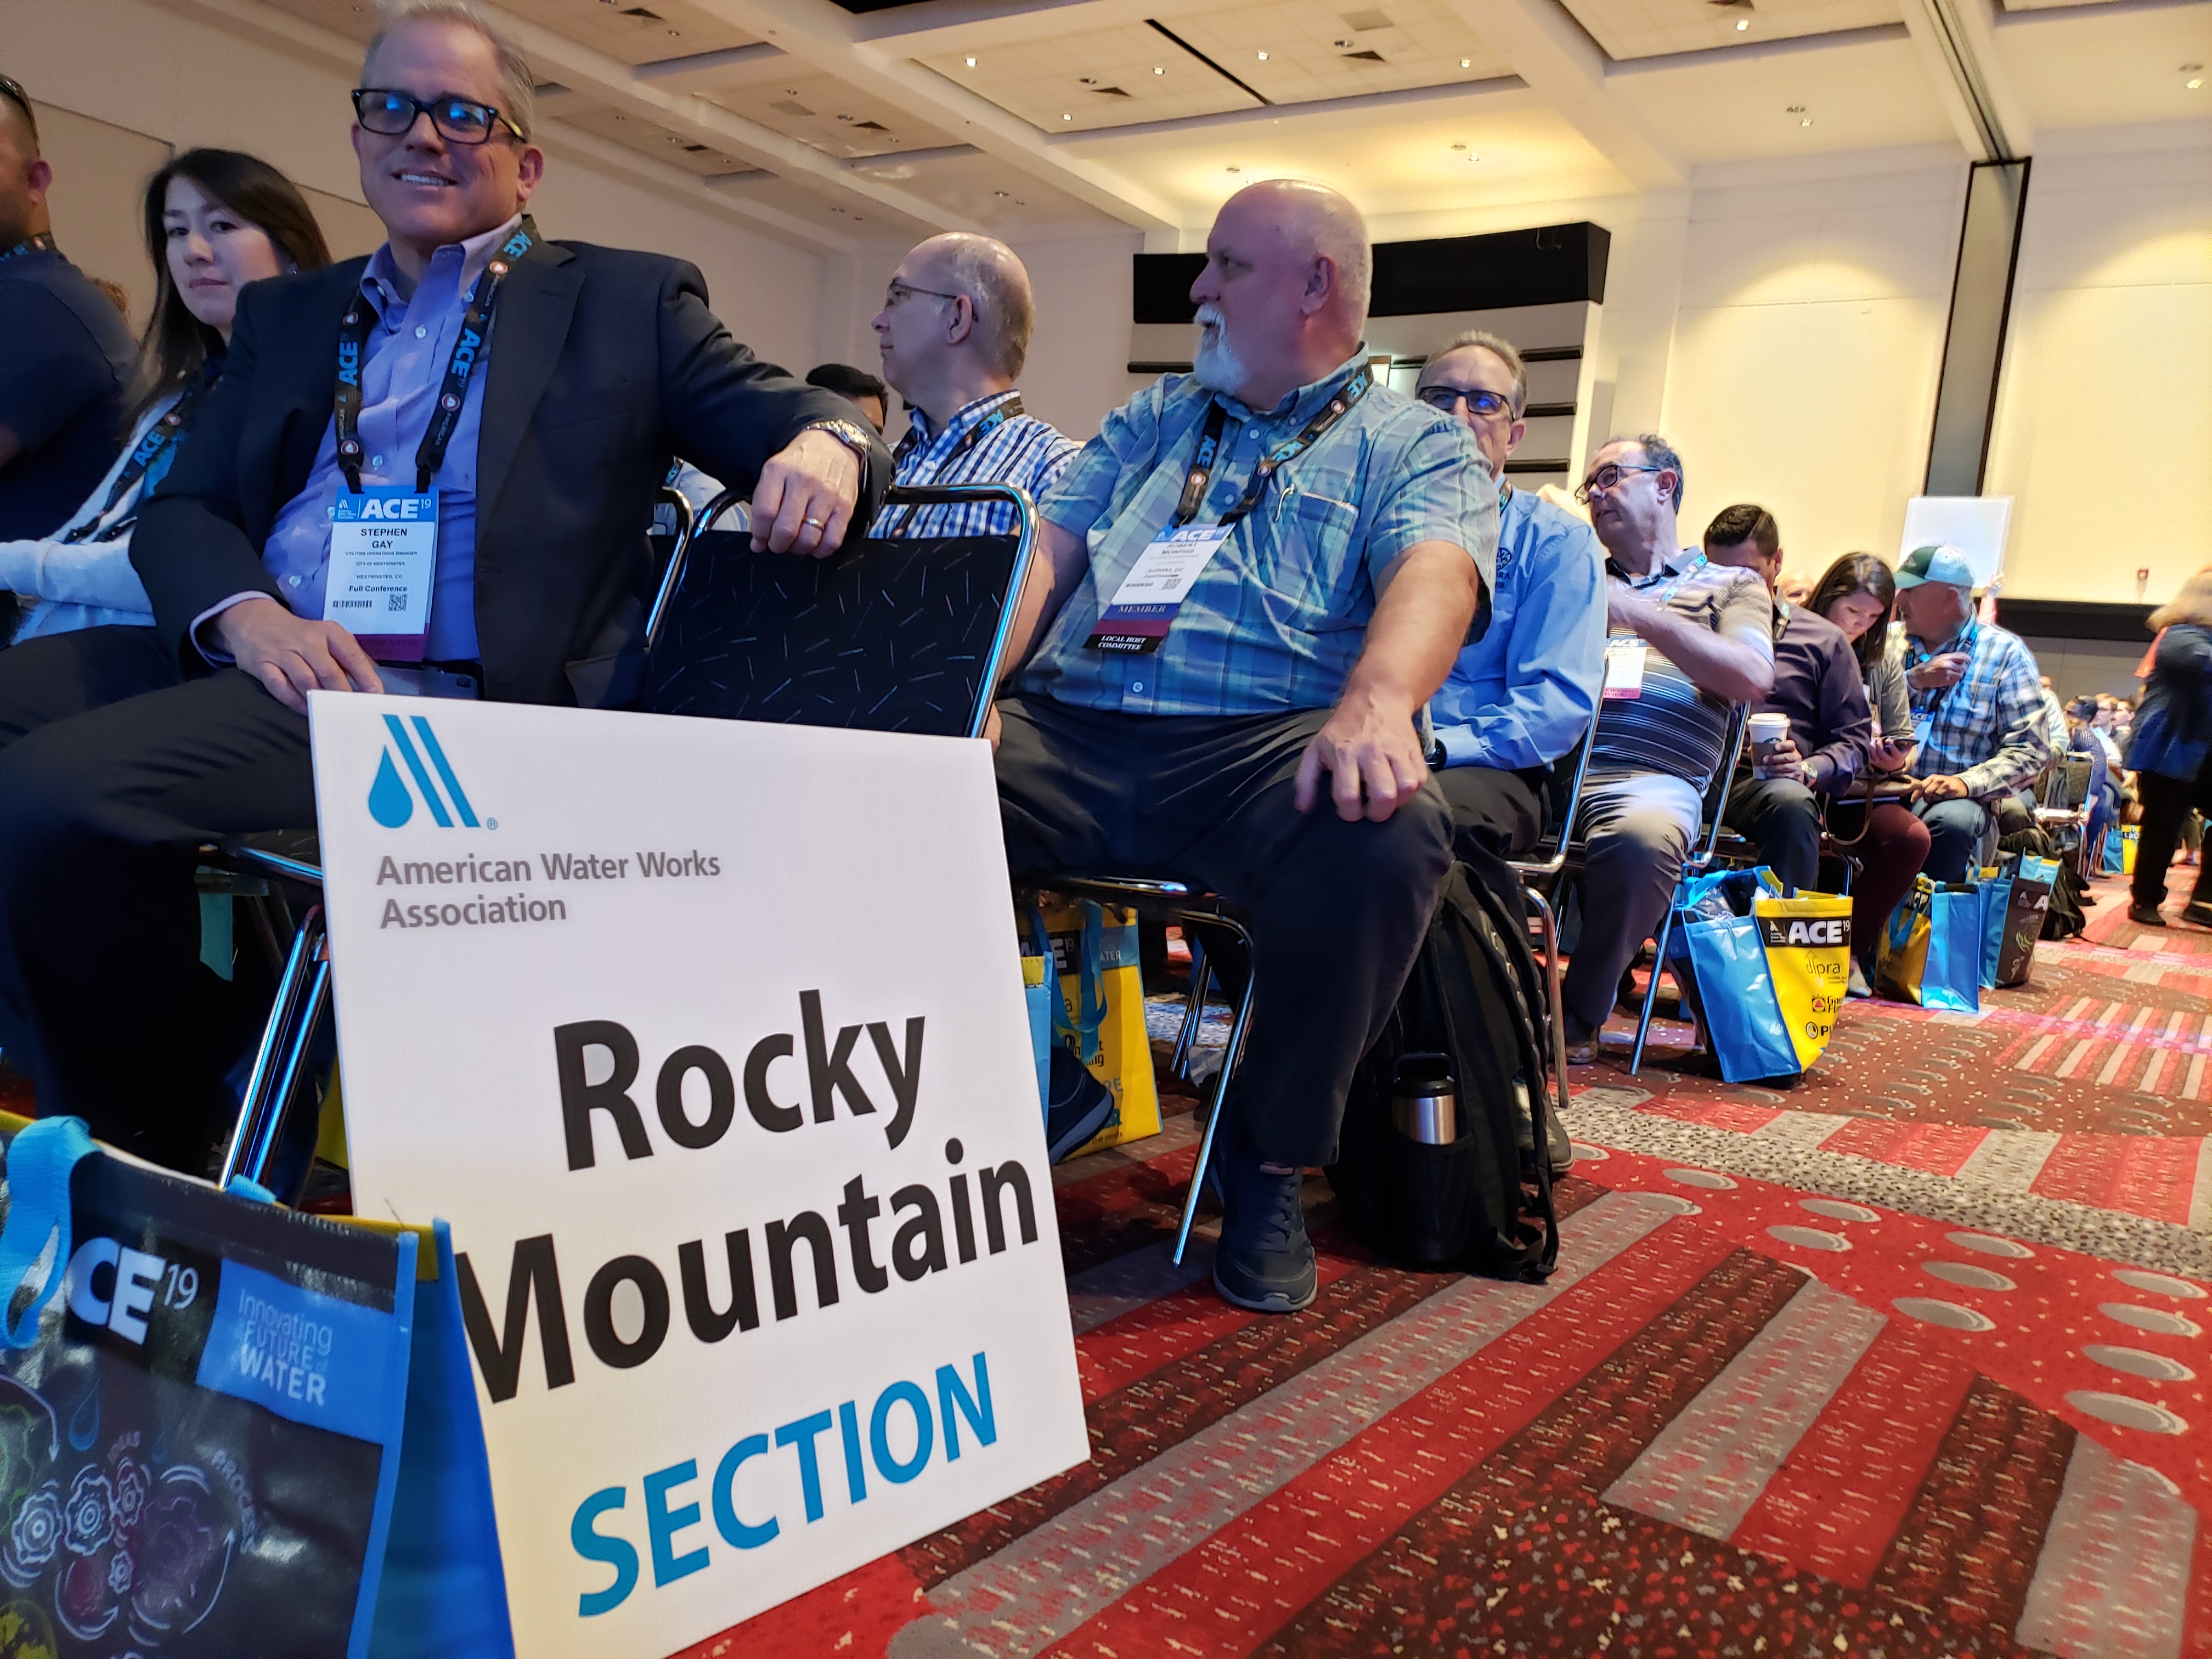 A sign for the Rocky Mountain section sits on the ground in a crowded ballroom.